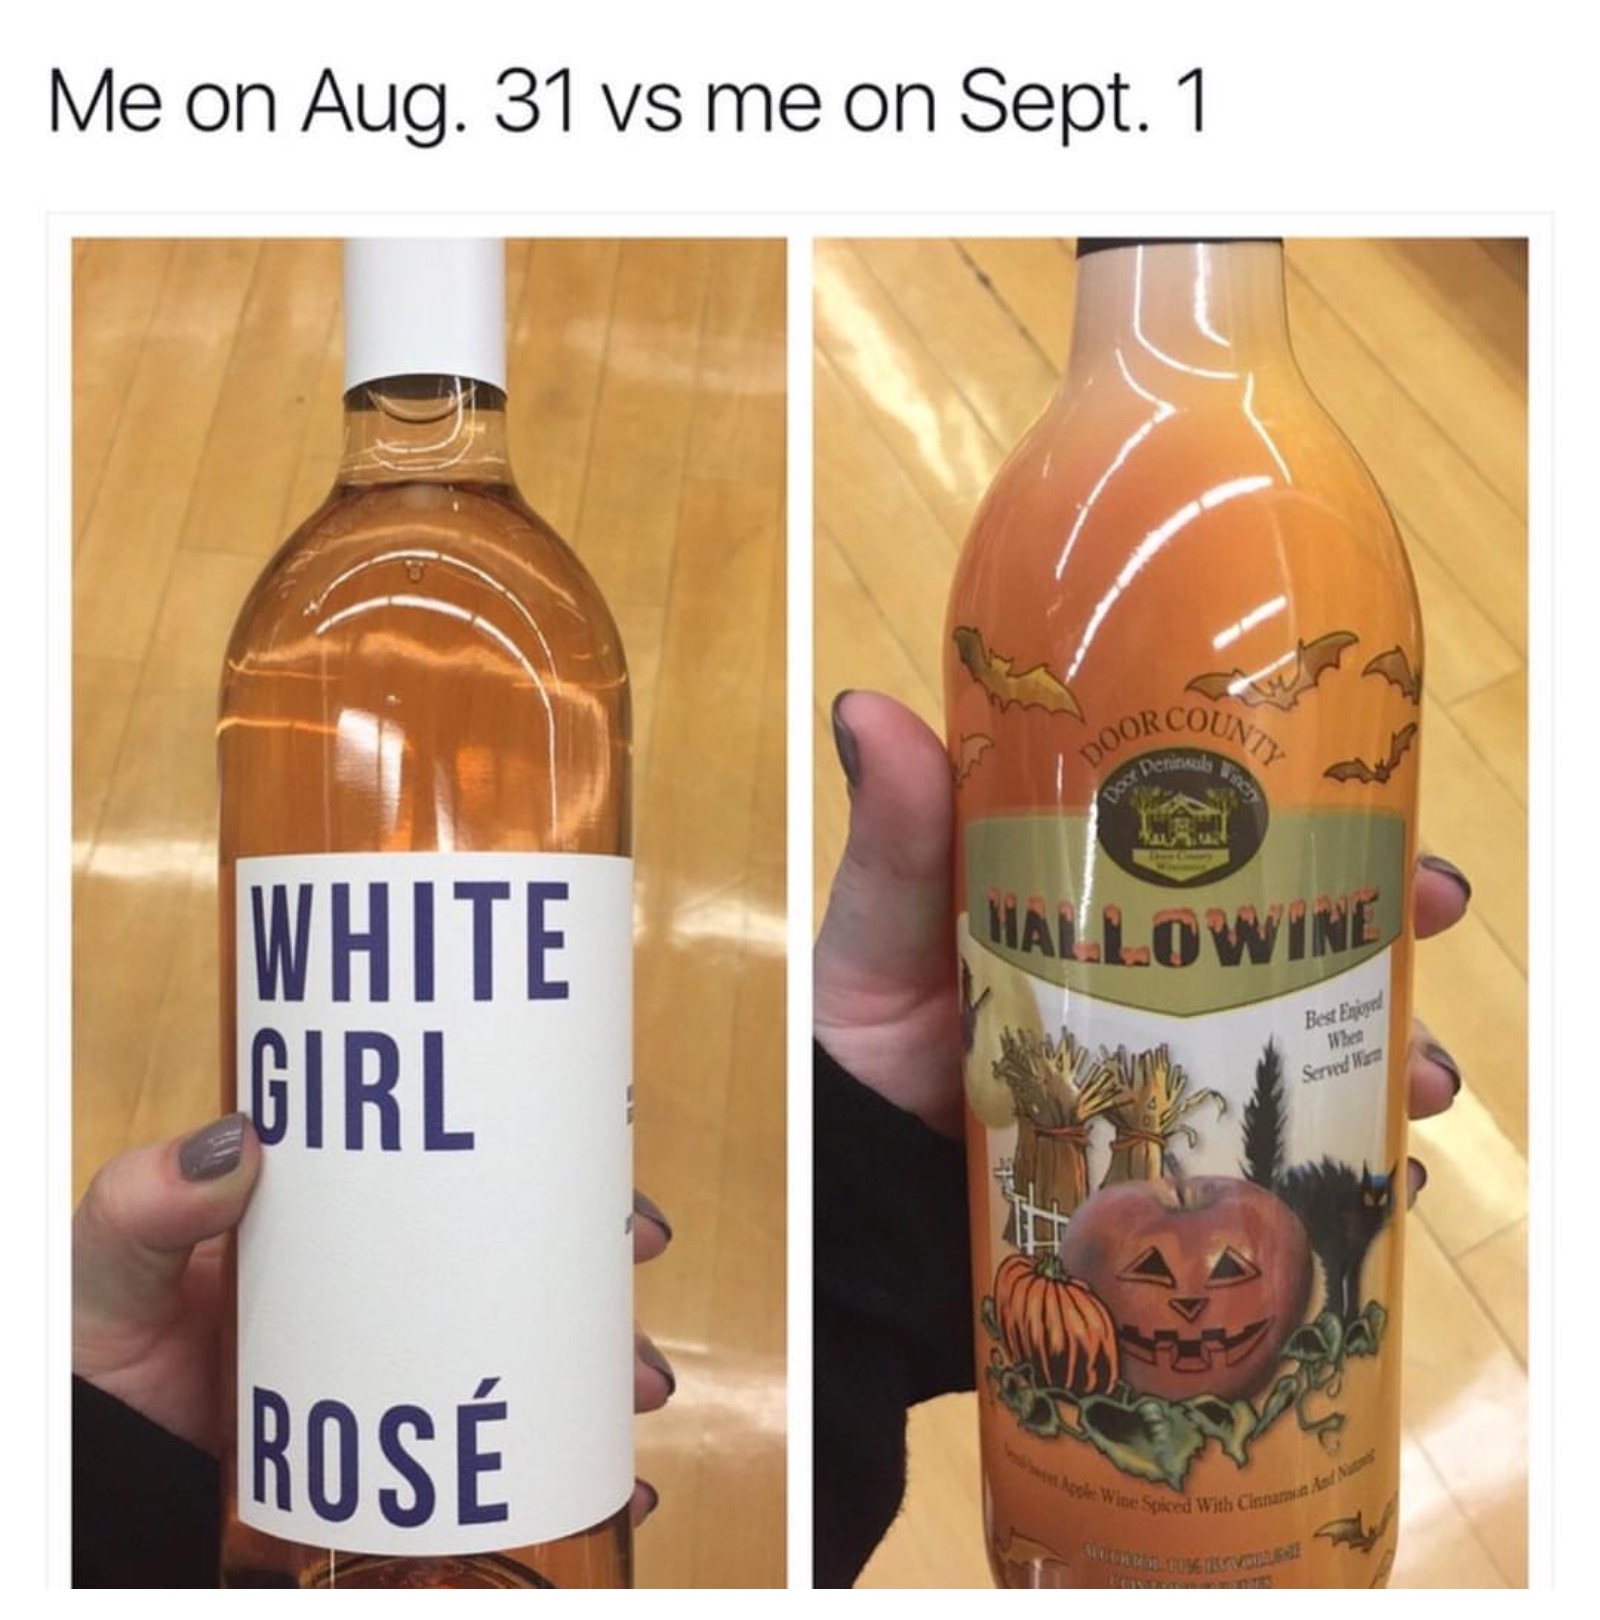 Dank meme of white girls switching to pumpkin spice mode the second it is September.